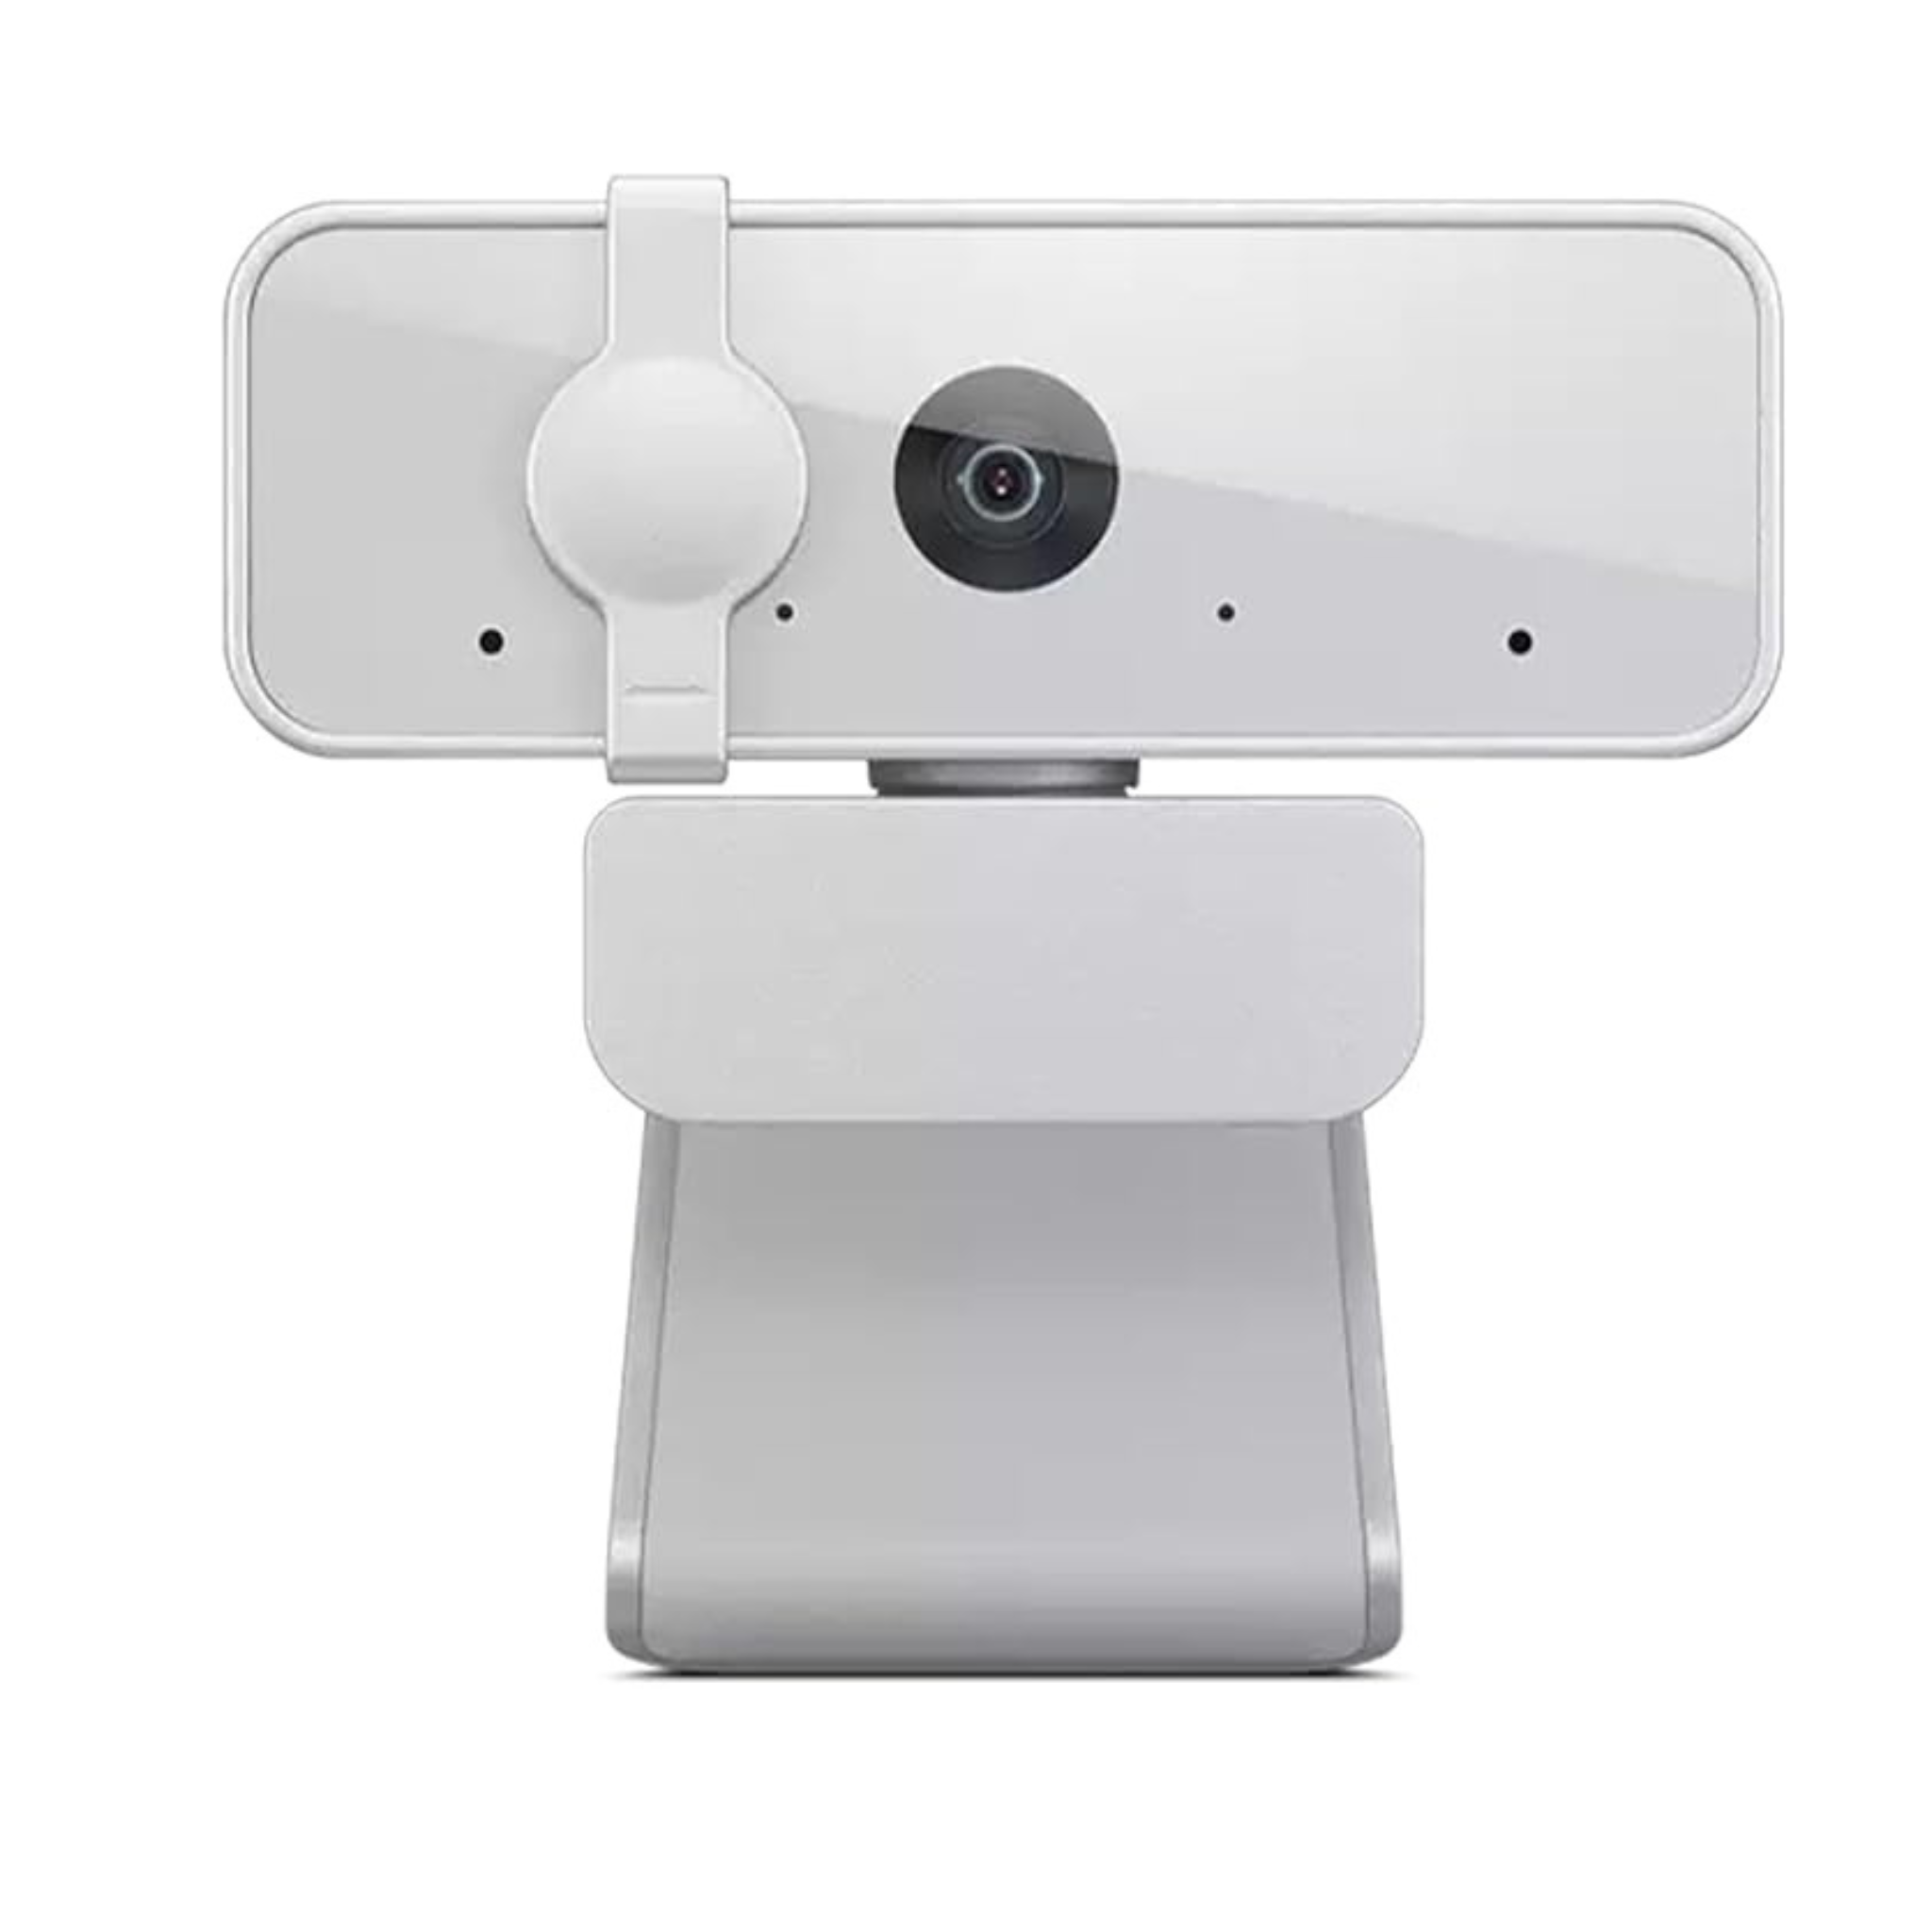 Lenovo 300 1080p FHD WebCam with Stereo Microphon